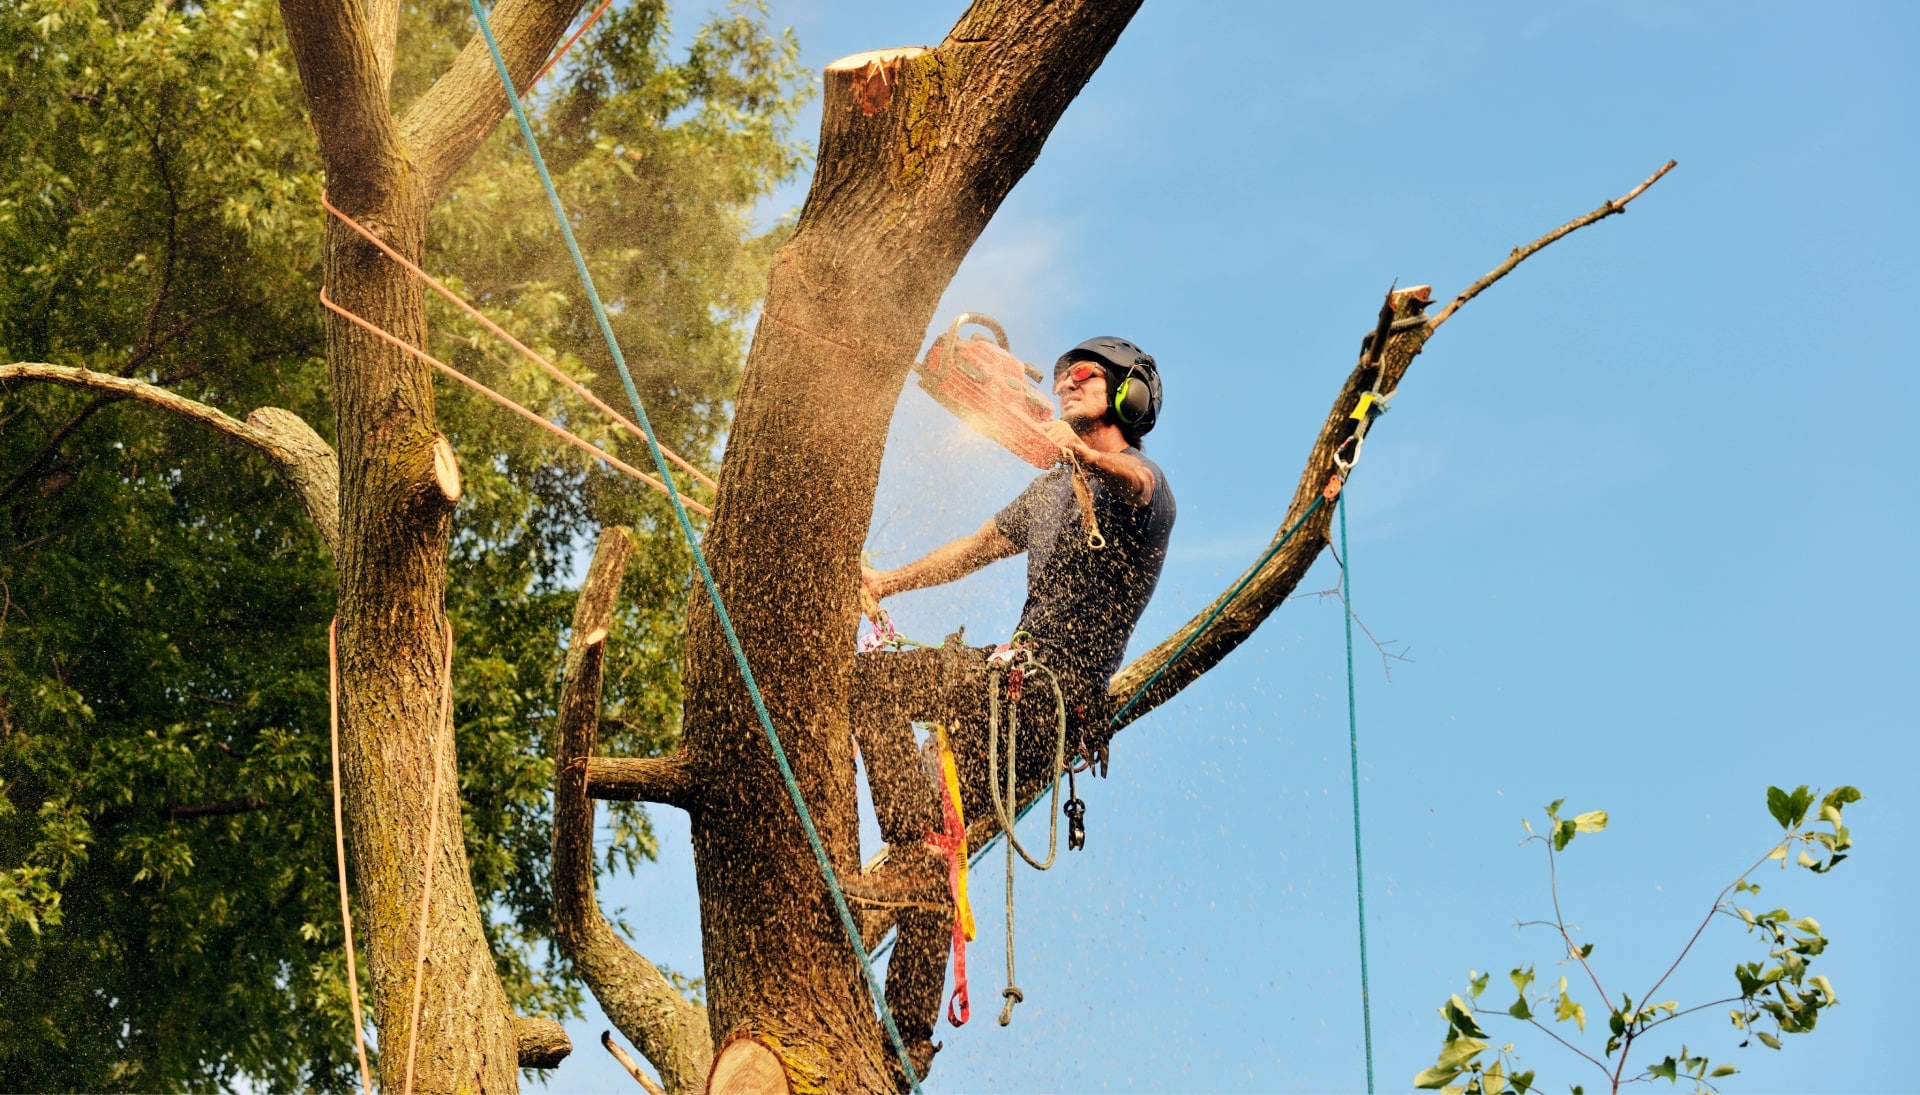 tree-removal-contractors-min-min in Coon Rapids